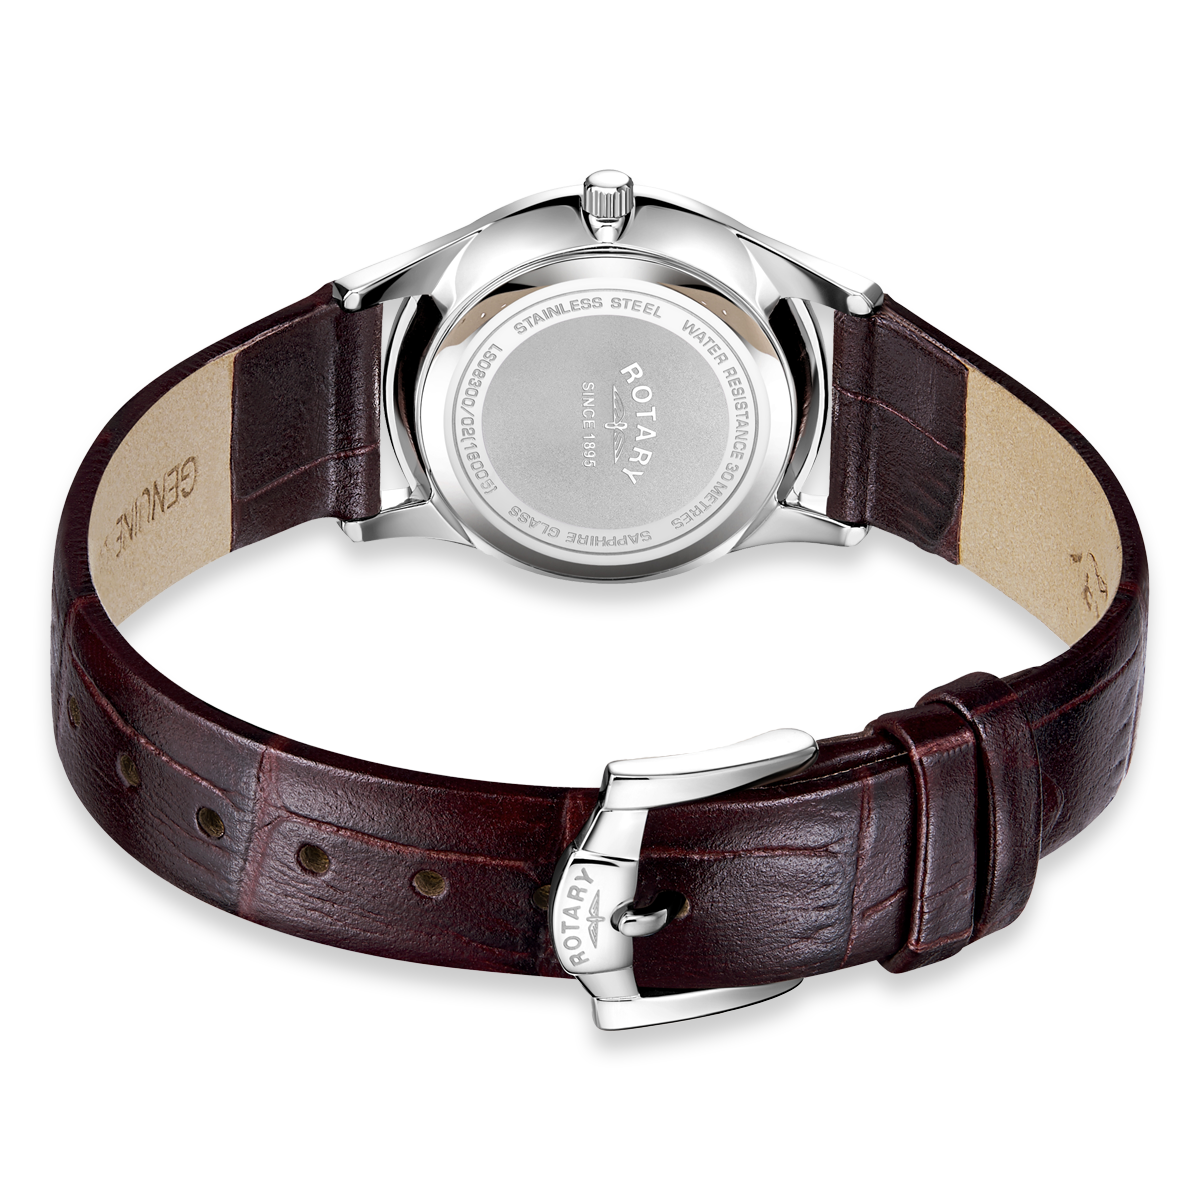 Rotary Ultra Slim Watch, Mother of Pearl Dial with Brown Leather Strap - LS08300/02